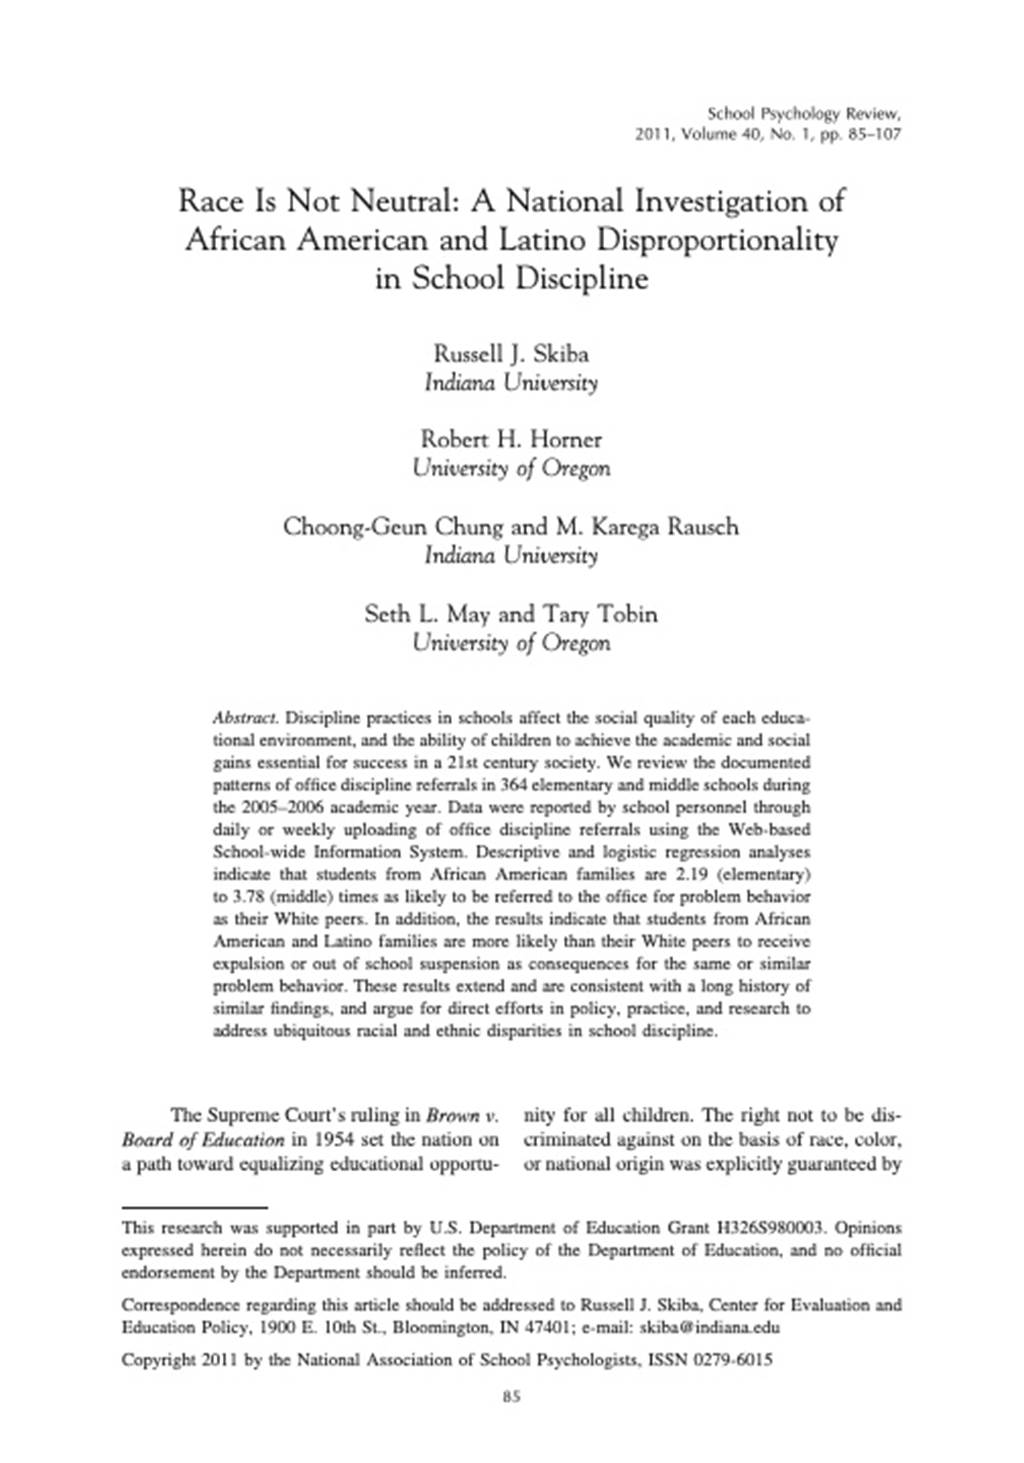 Race Is Not Neutral: A National Investigation of African American and Latino Disproportionality in School Discipline - Document Image